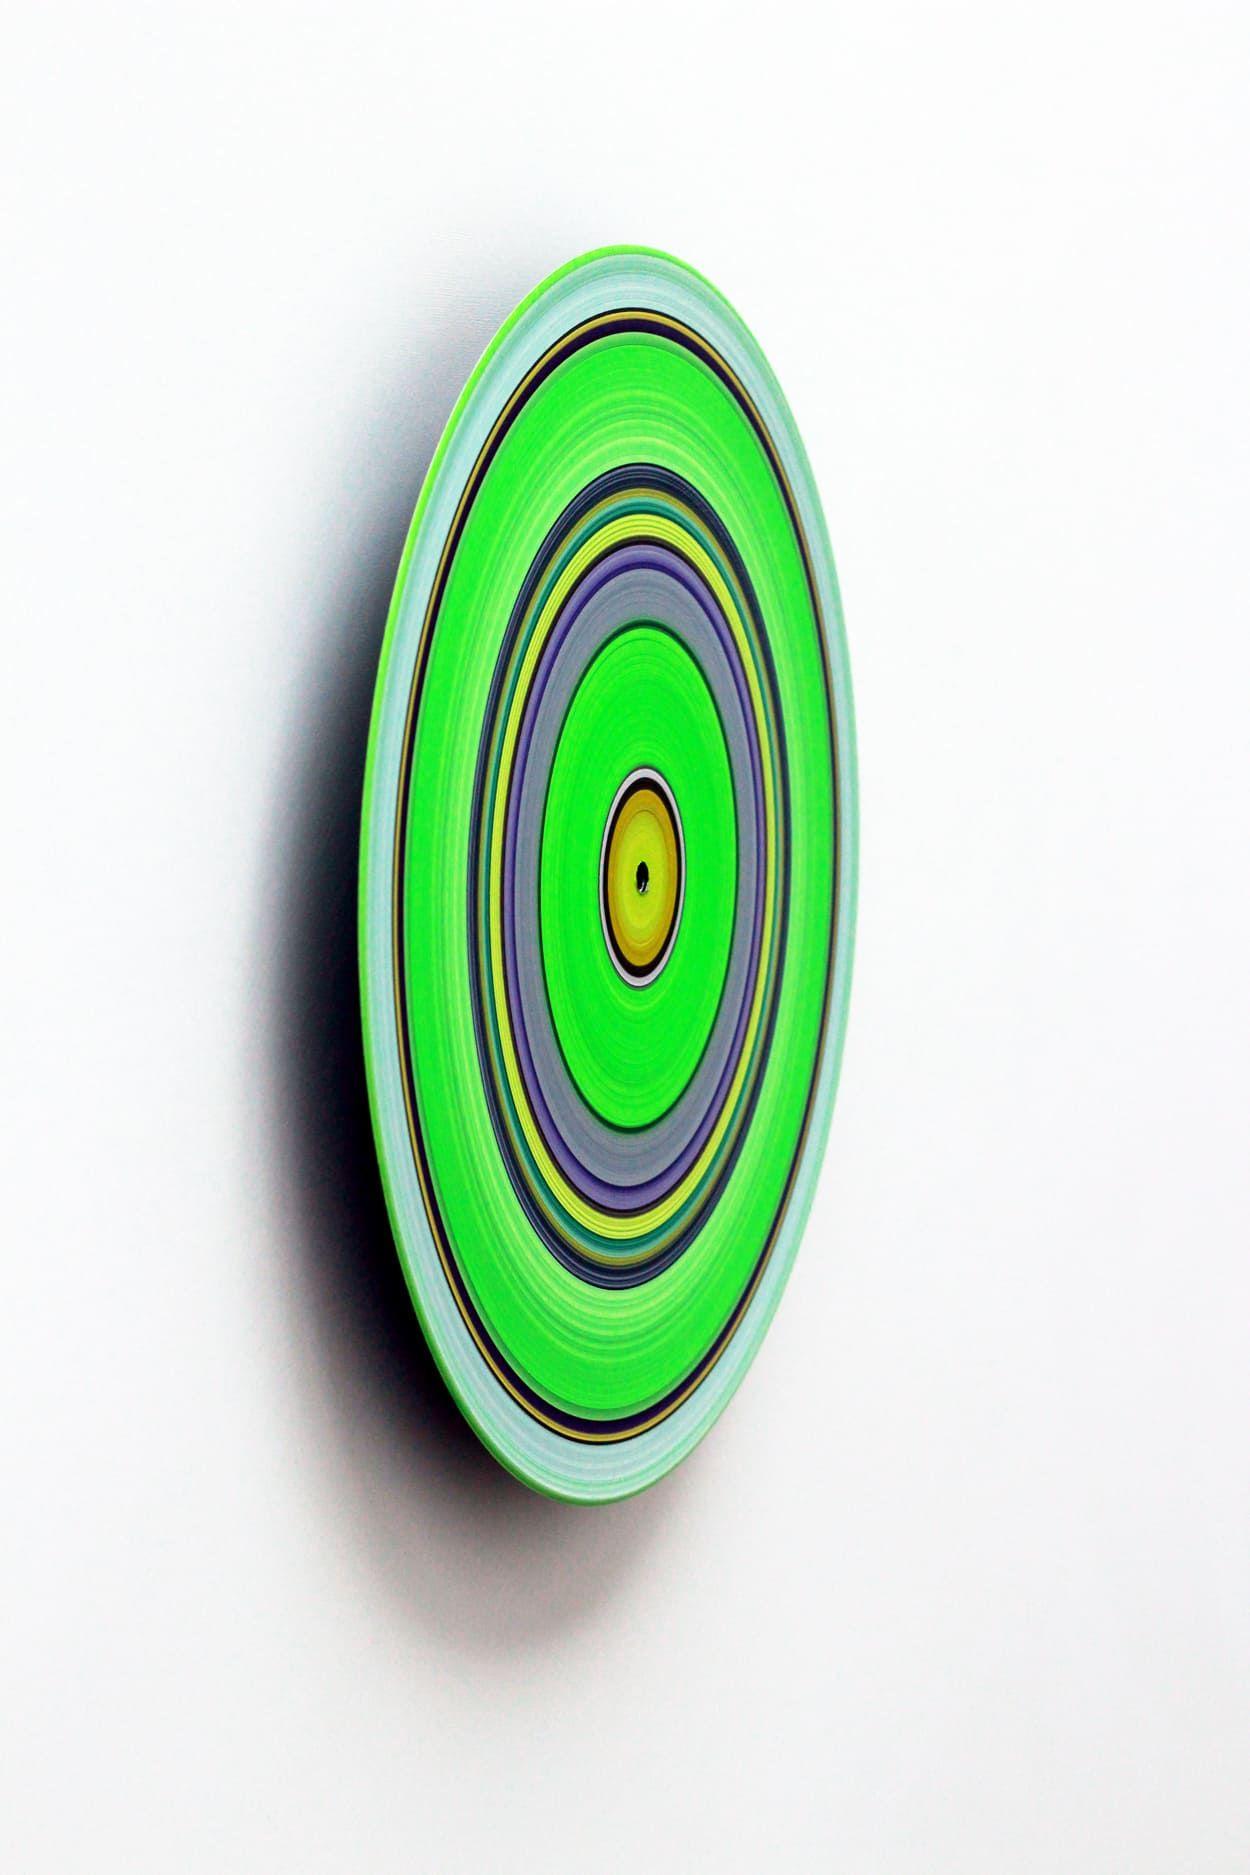 Green Edition No.12, Sound & Vision series by D. Marten - Painting on vinyl For Sale 1